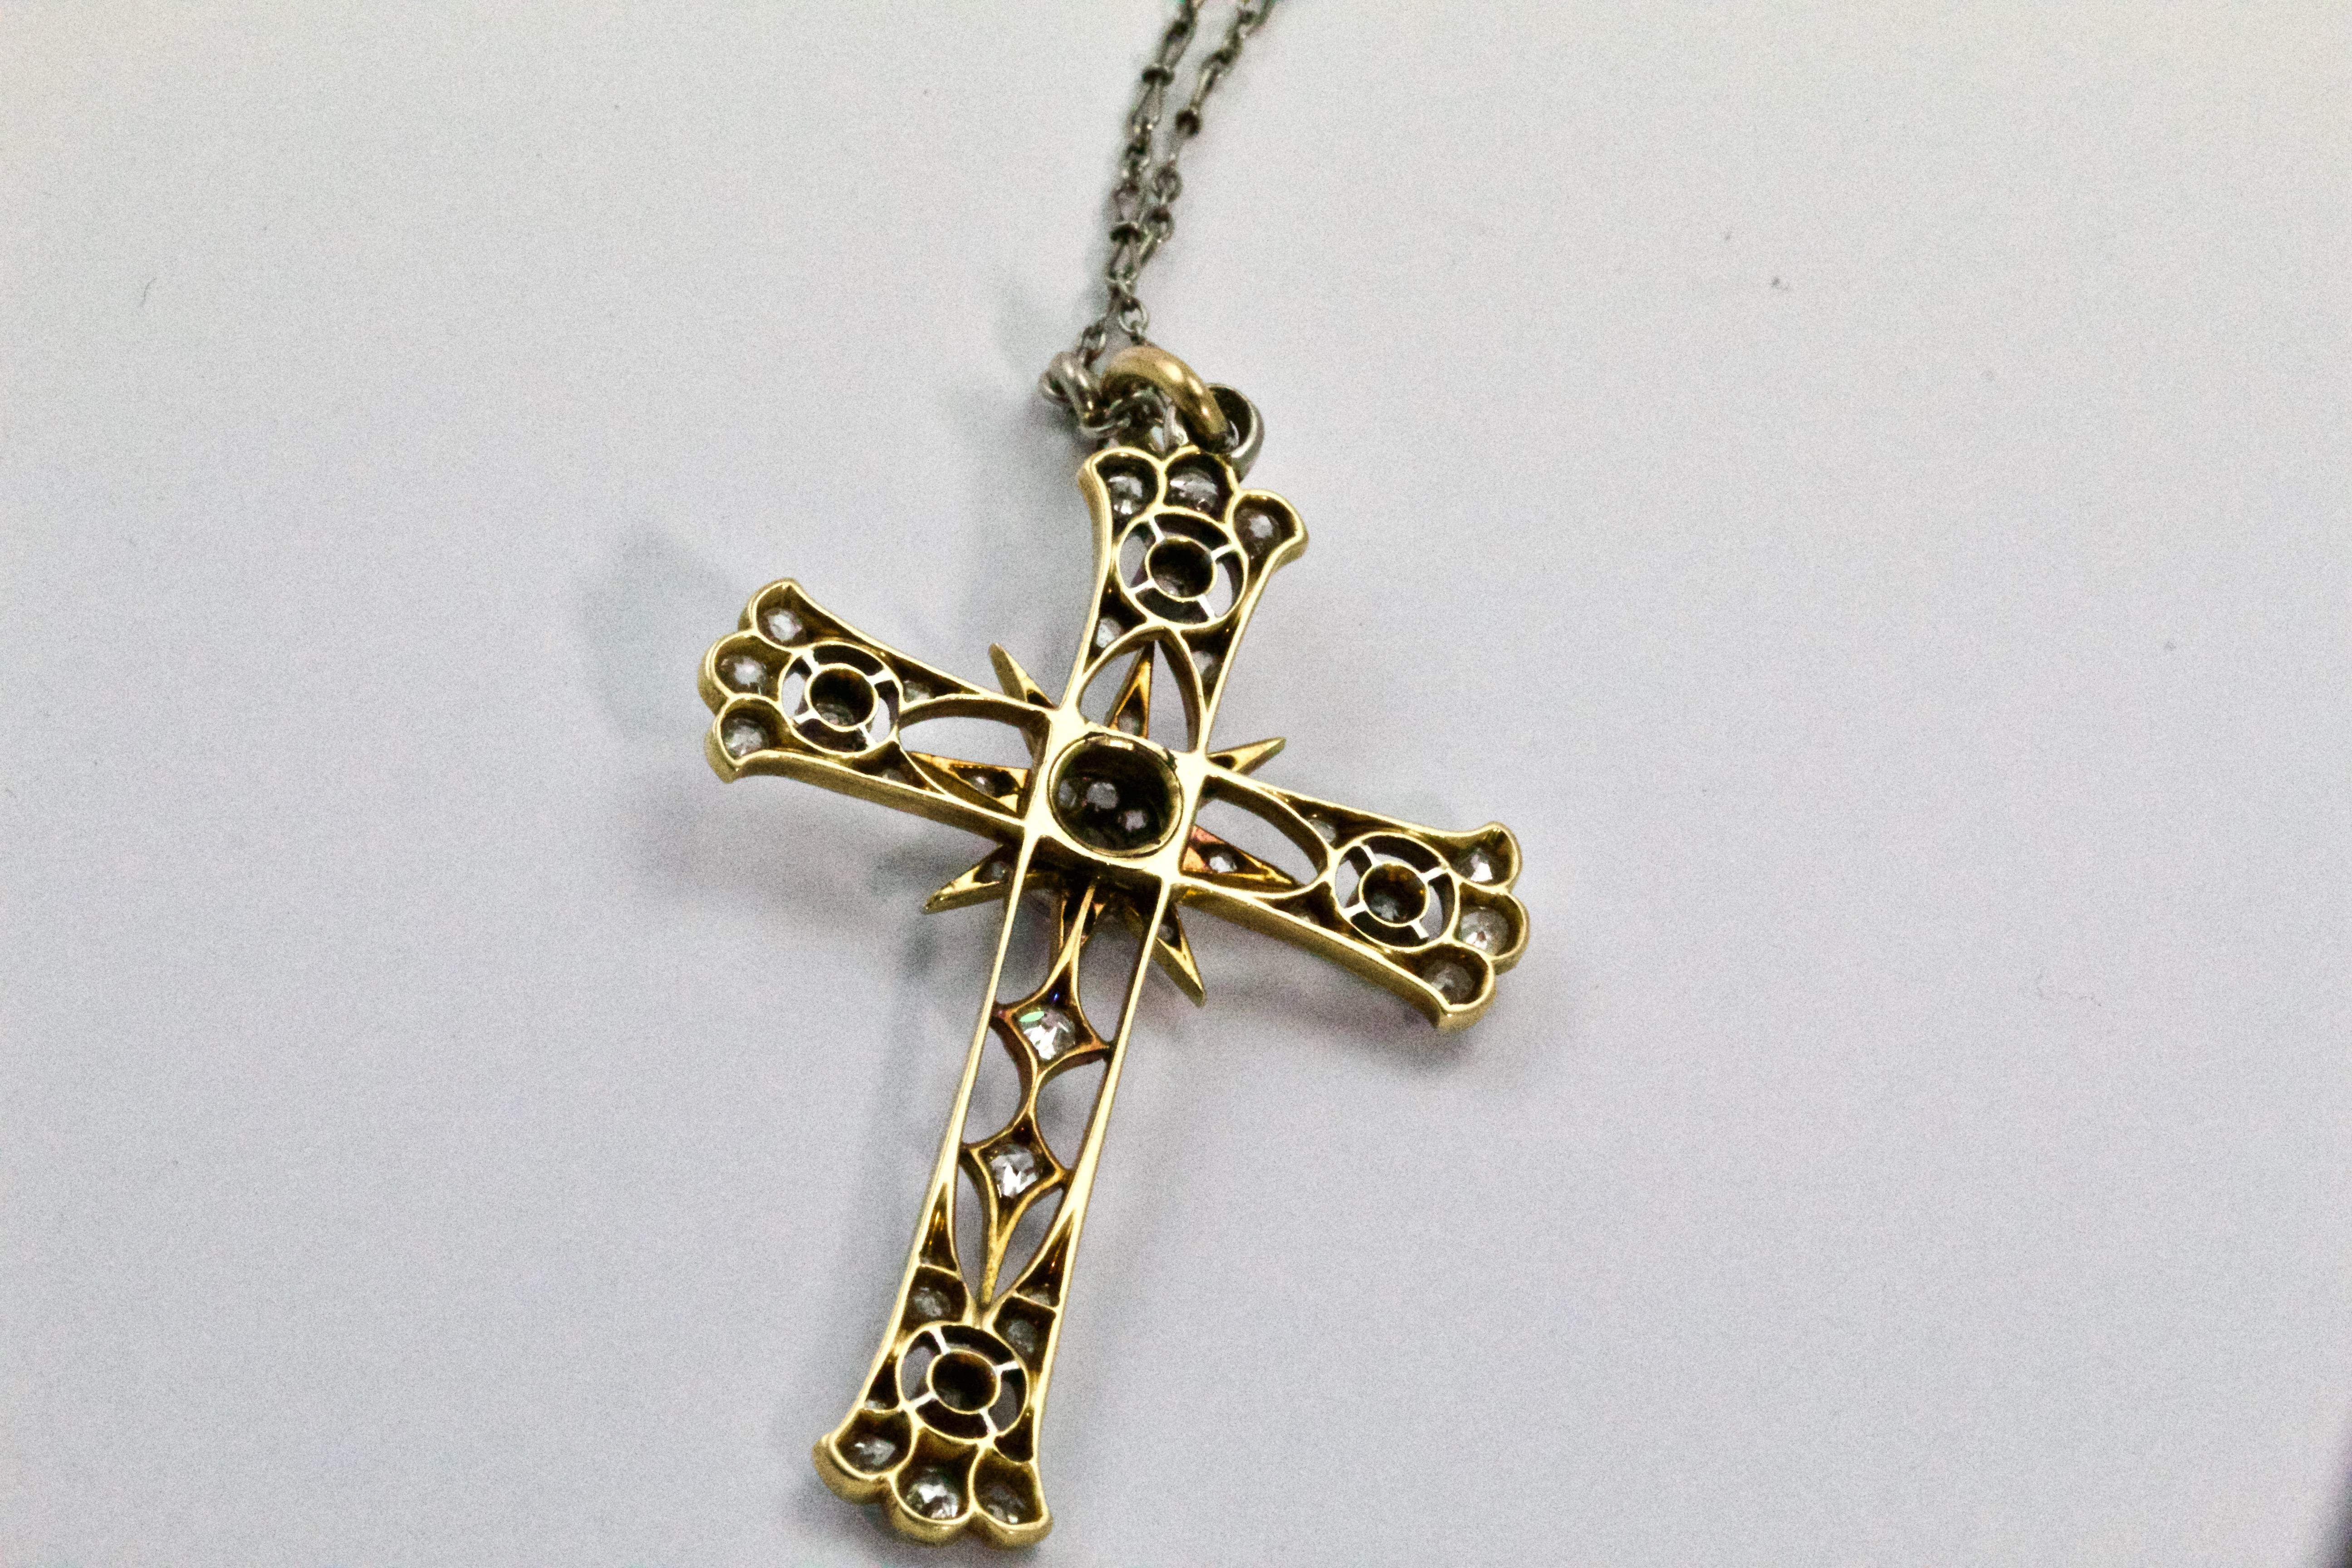 A stunning French Edwardian yellow and white gold cross pendant! With a fine open worked body and set with rose cut diamonds and millegrain detail throughout, suspended from a platinum period chain this is the ideal addition to any collection!